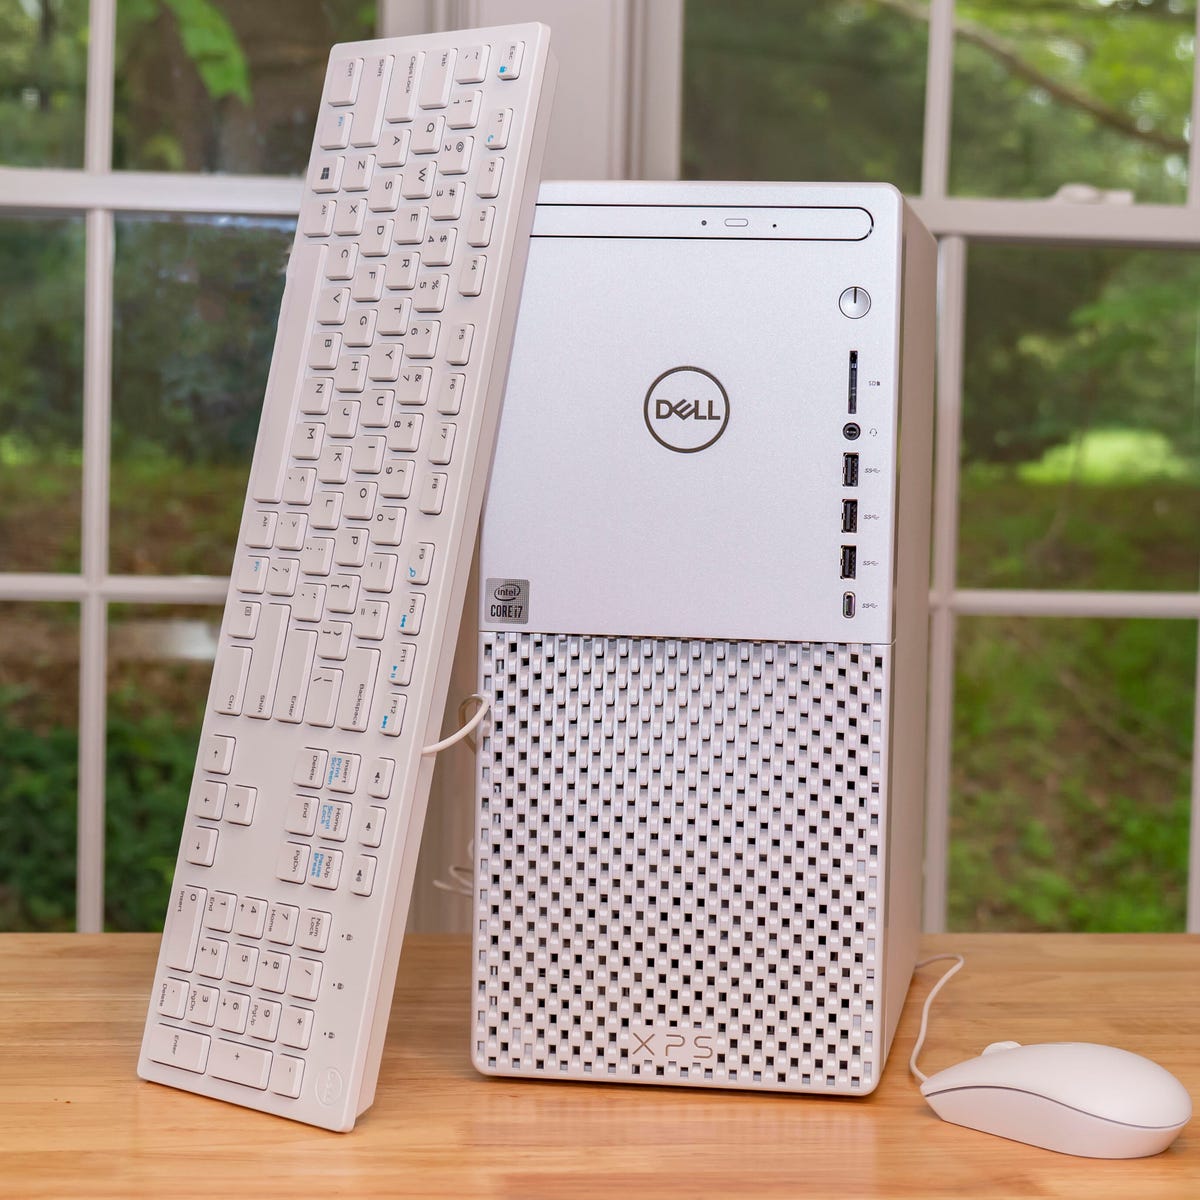 Dell XPS Desktop 8940 Special Edition review: A whole lot of computer in a  small space - CNET